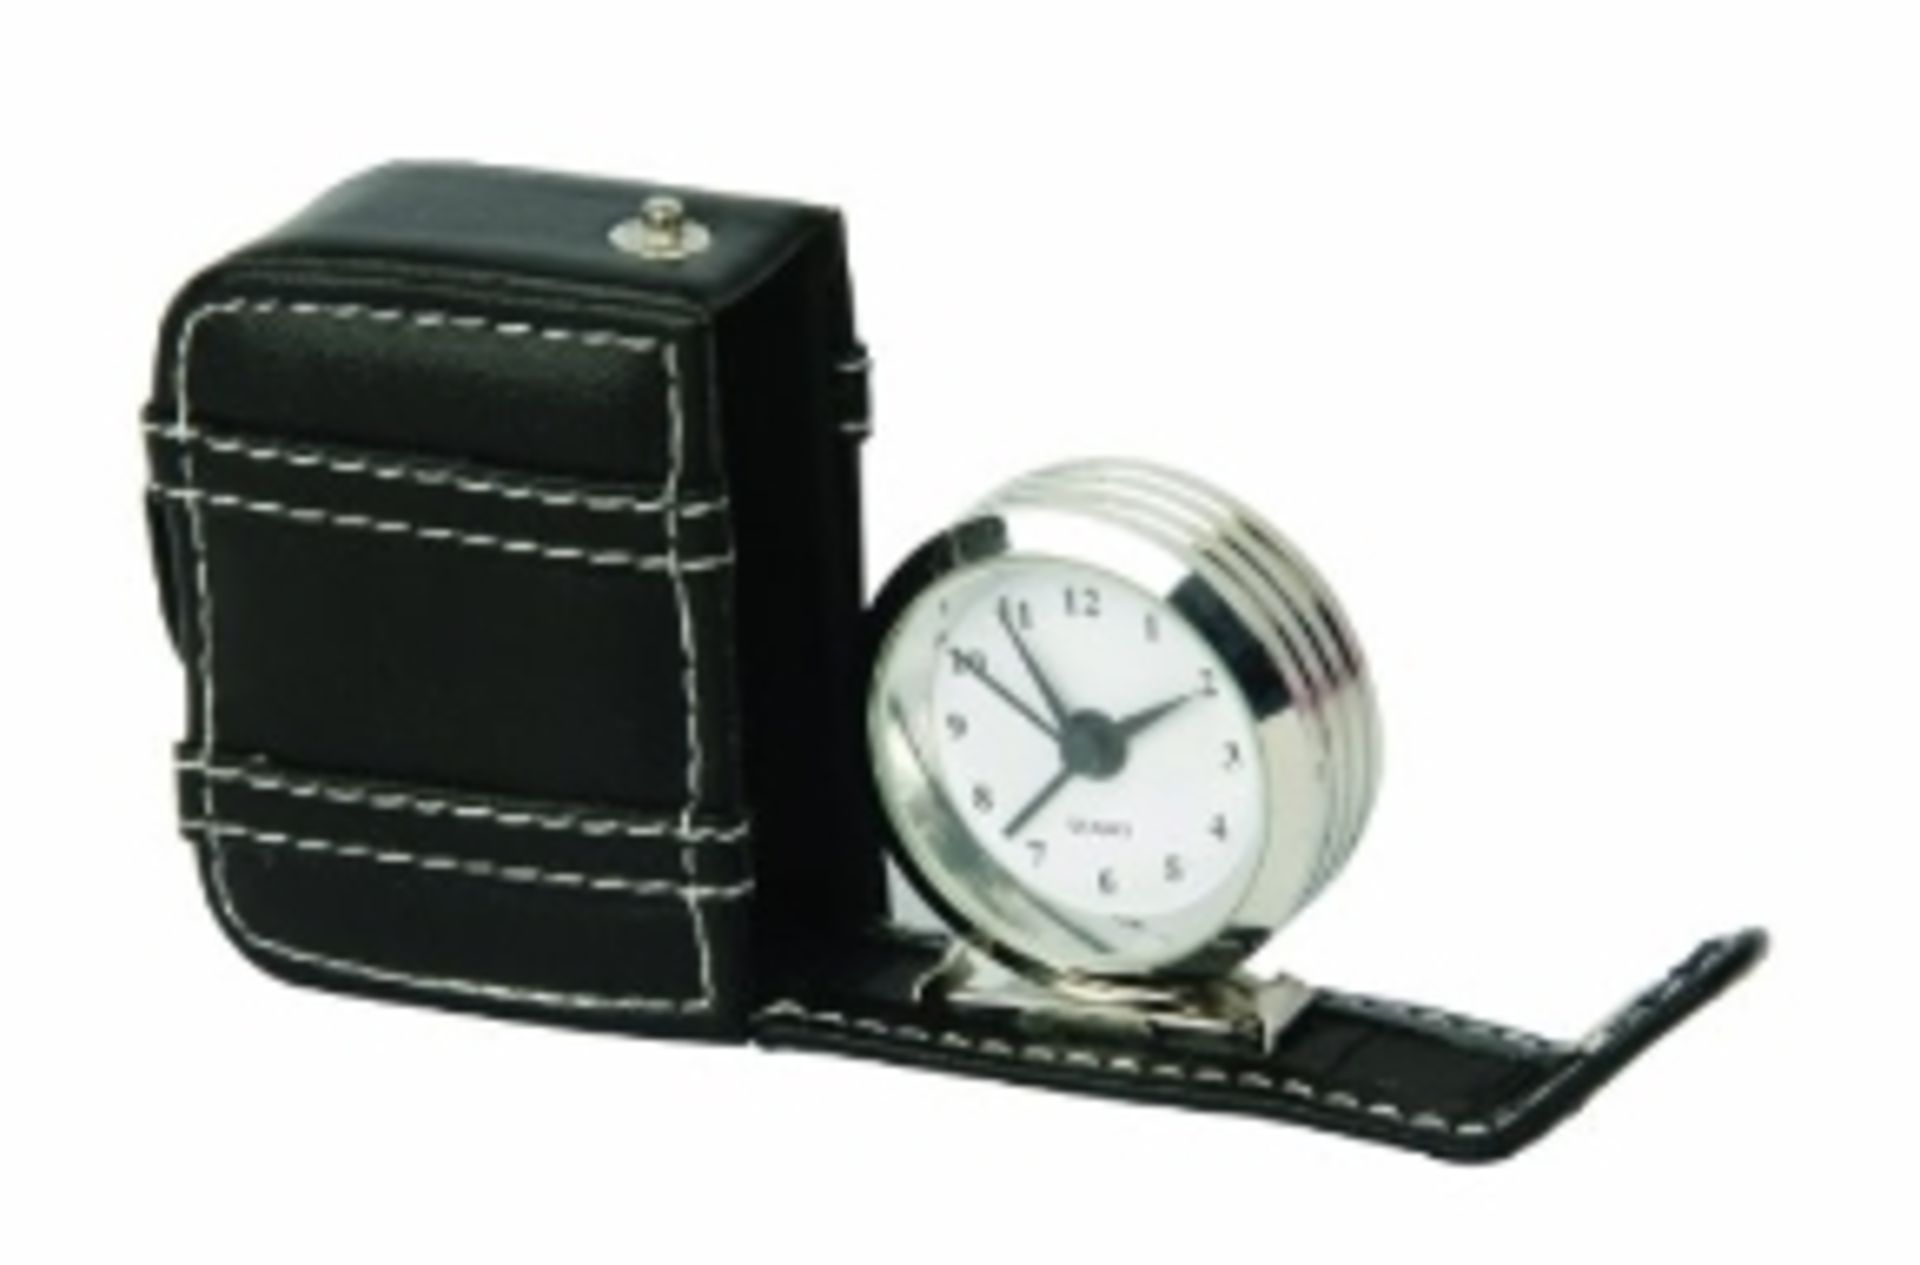 V Brand New Time Goes By Travel Clock £7-49 (Ebay) X 2 YOUR BID PRICE TO BE MULTIPLIED BY TWO